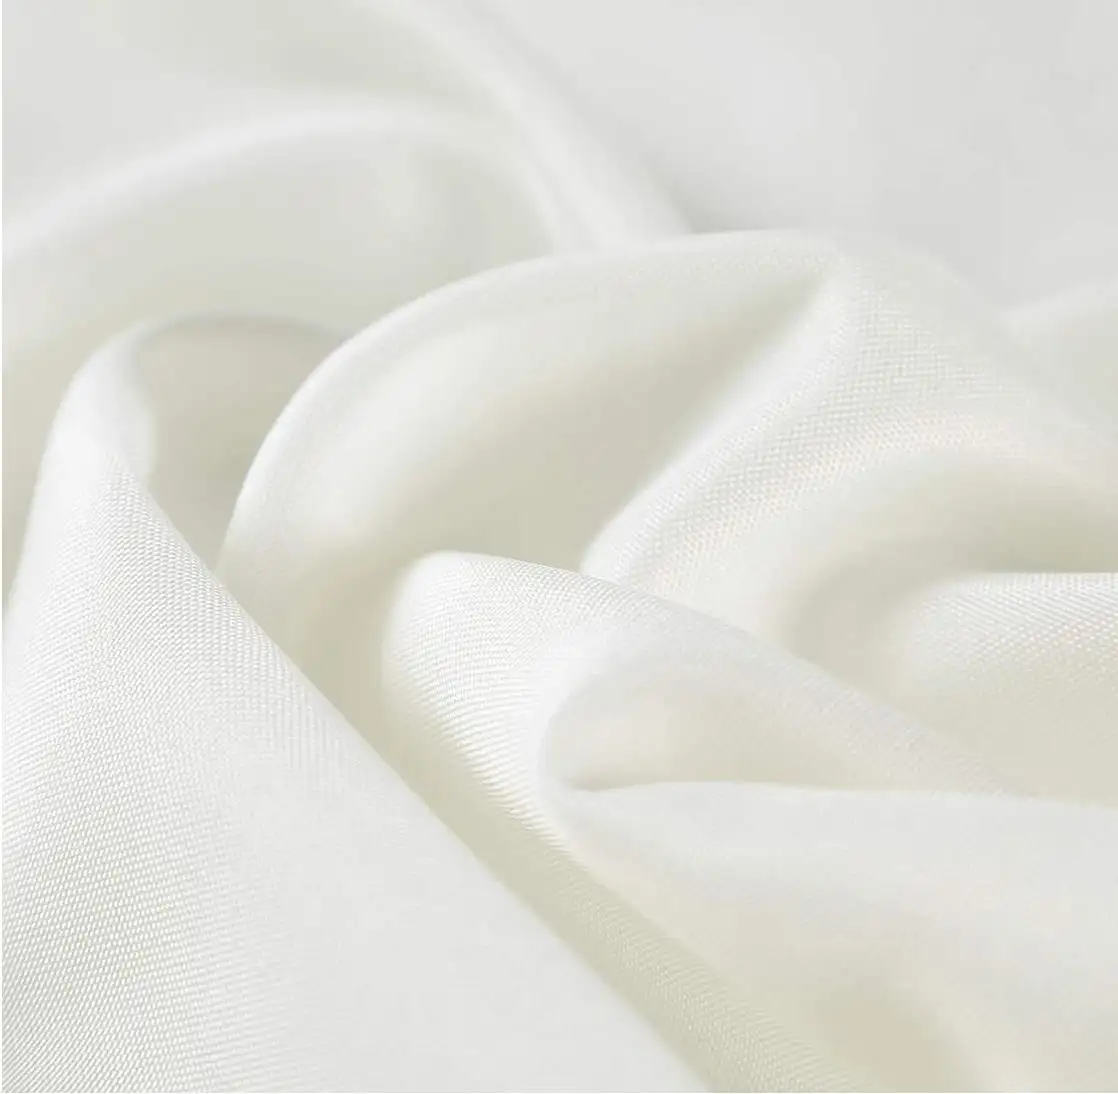 21''21''with Hemmed Edges For Everyday Use Weddings Or Parties For Restaurants Events And Dinner Napkin Highly Absorbent